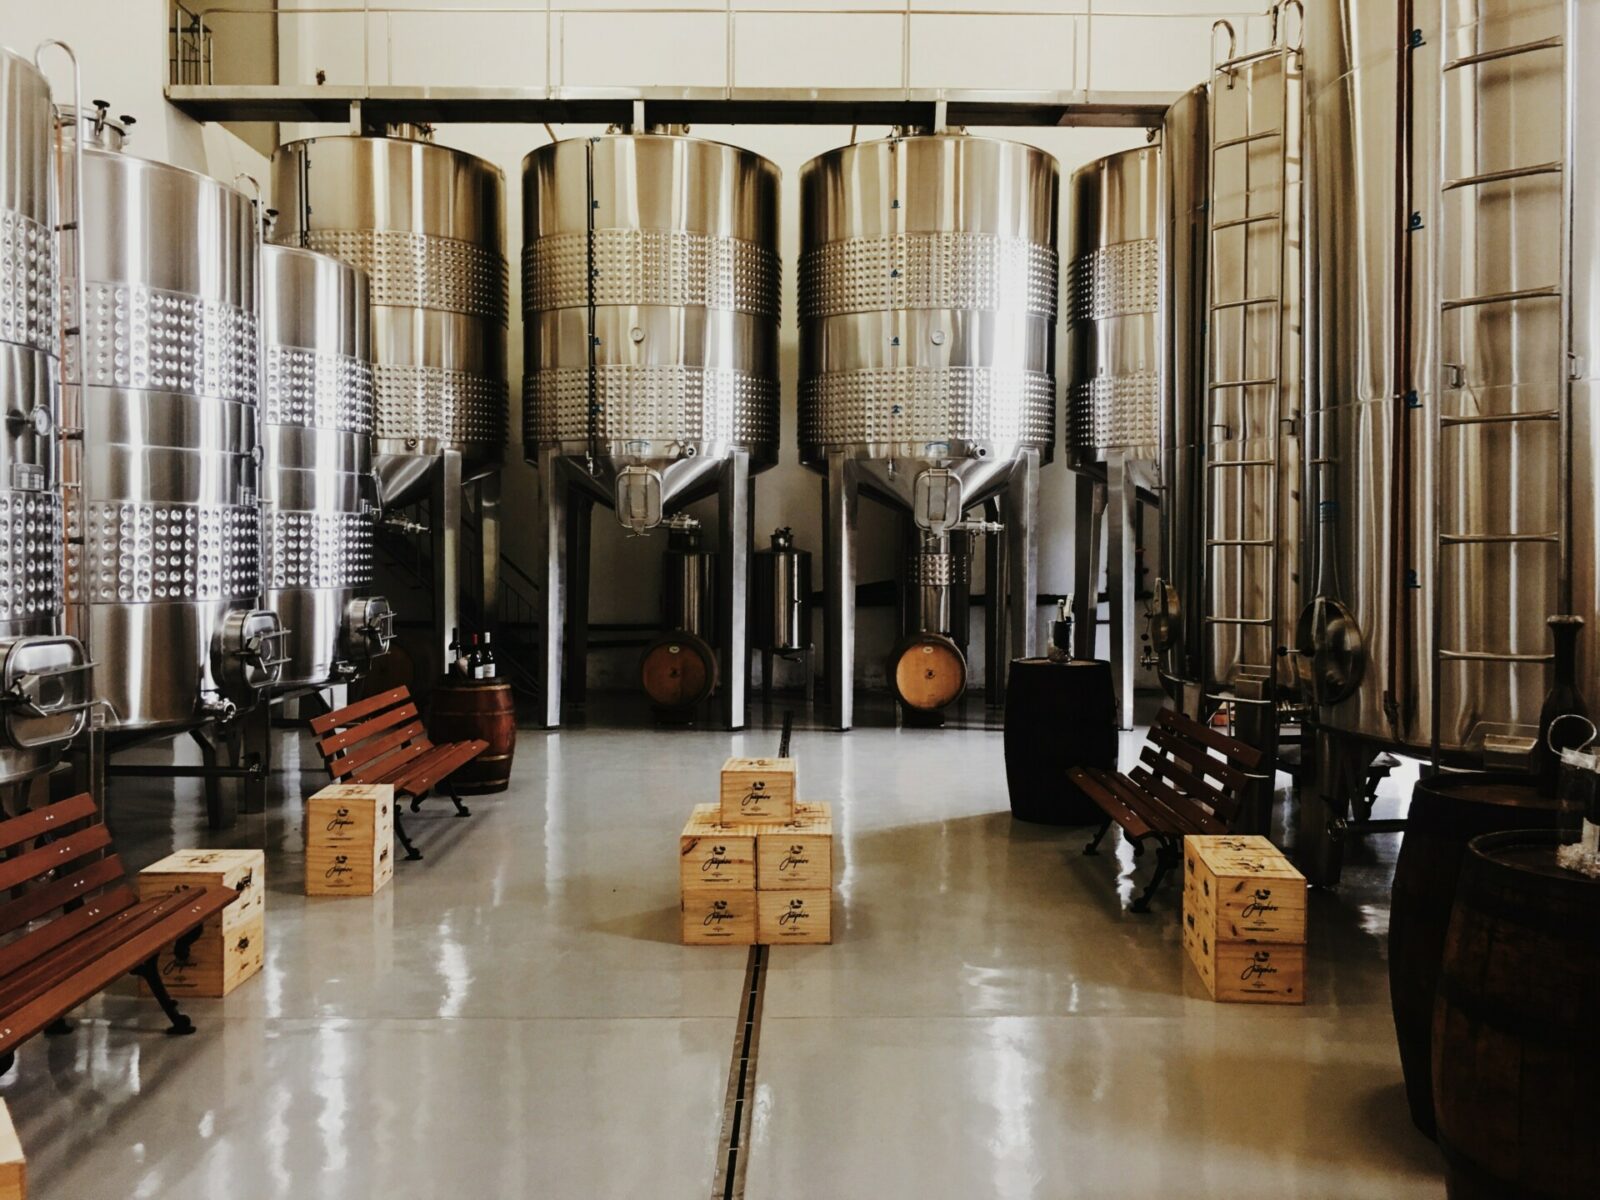 One of the Breweries in Málaga